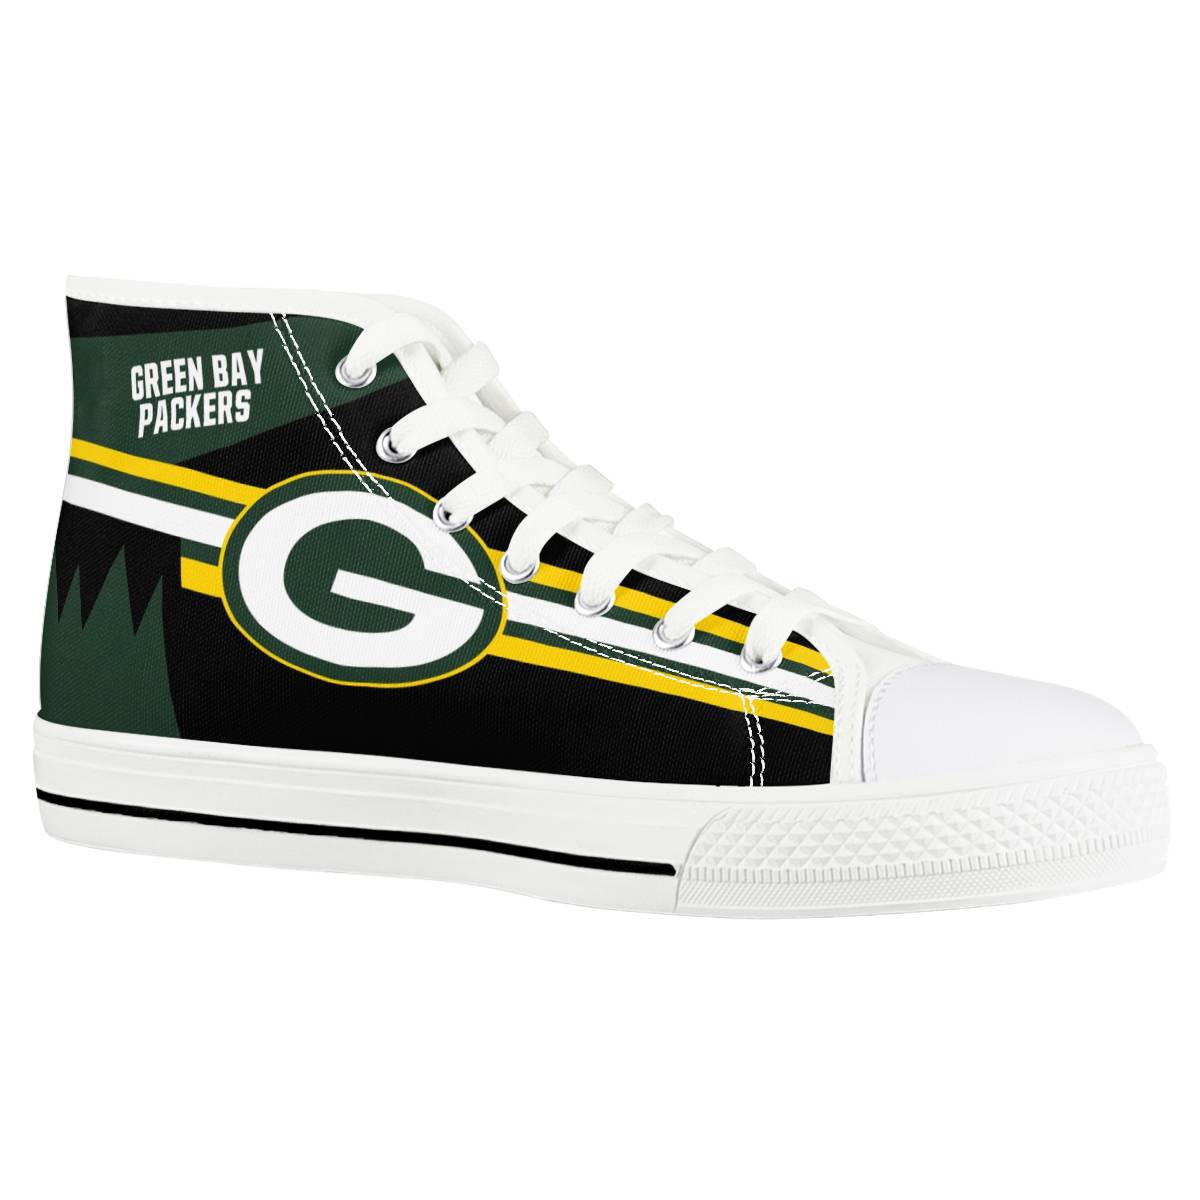 Men's Green Bay Packers High Top Canvas Sneakers 006